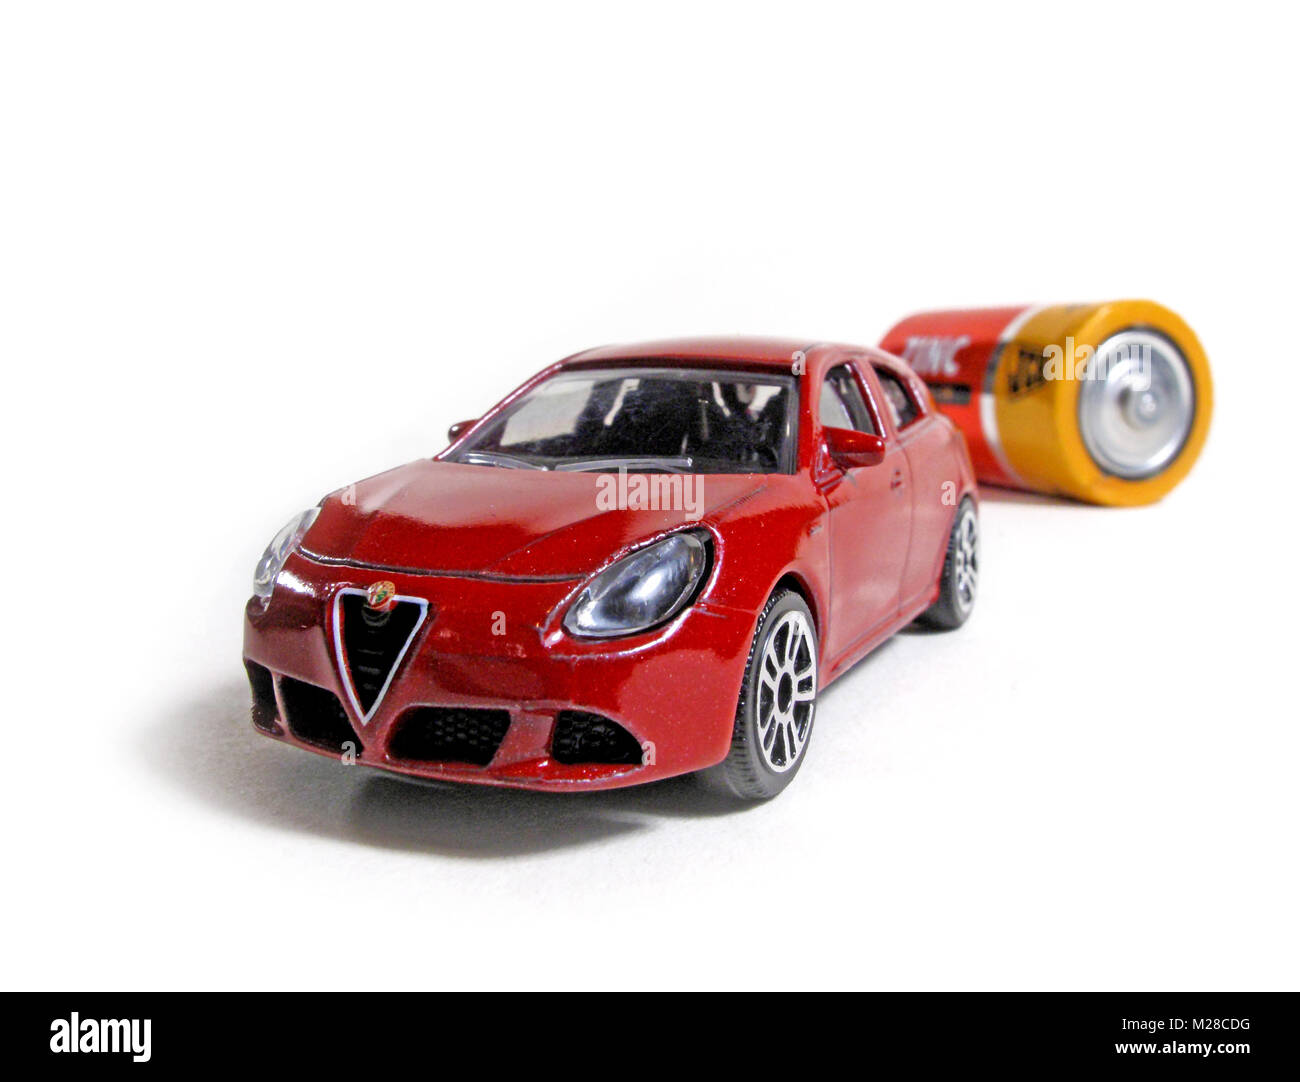 Alfa romeo giulietta Cut Out Stock Images & Pictures - Alamy